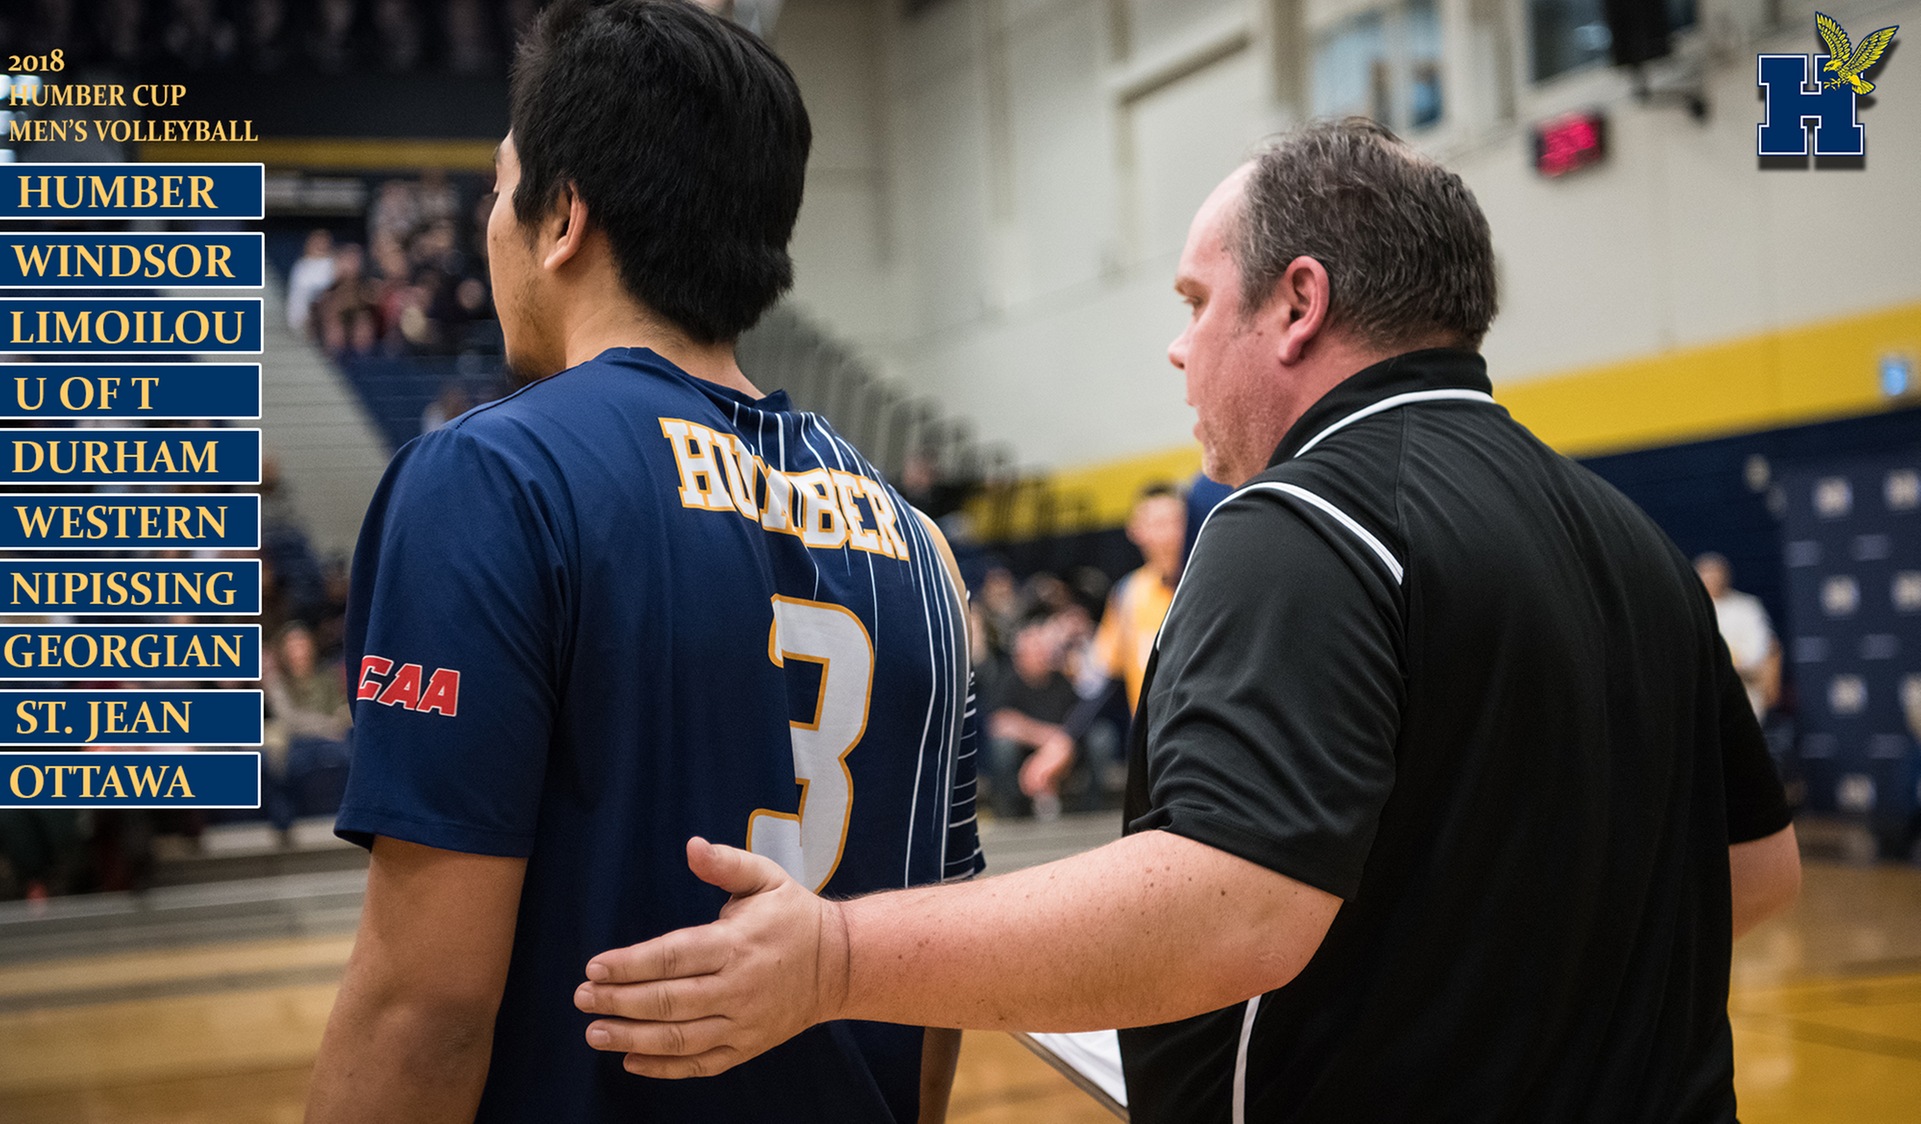 HUMBER CUP MEN'S VOLLEYBALL FEATURE TOP COLLEGE AND UNIVERSITY TEAMS